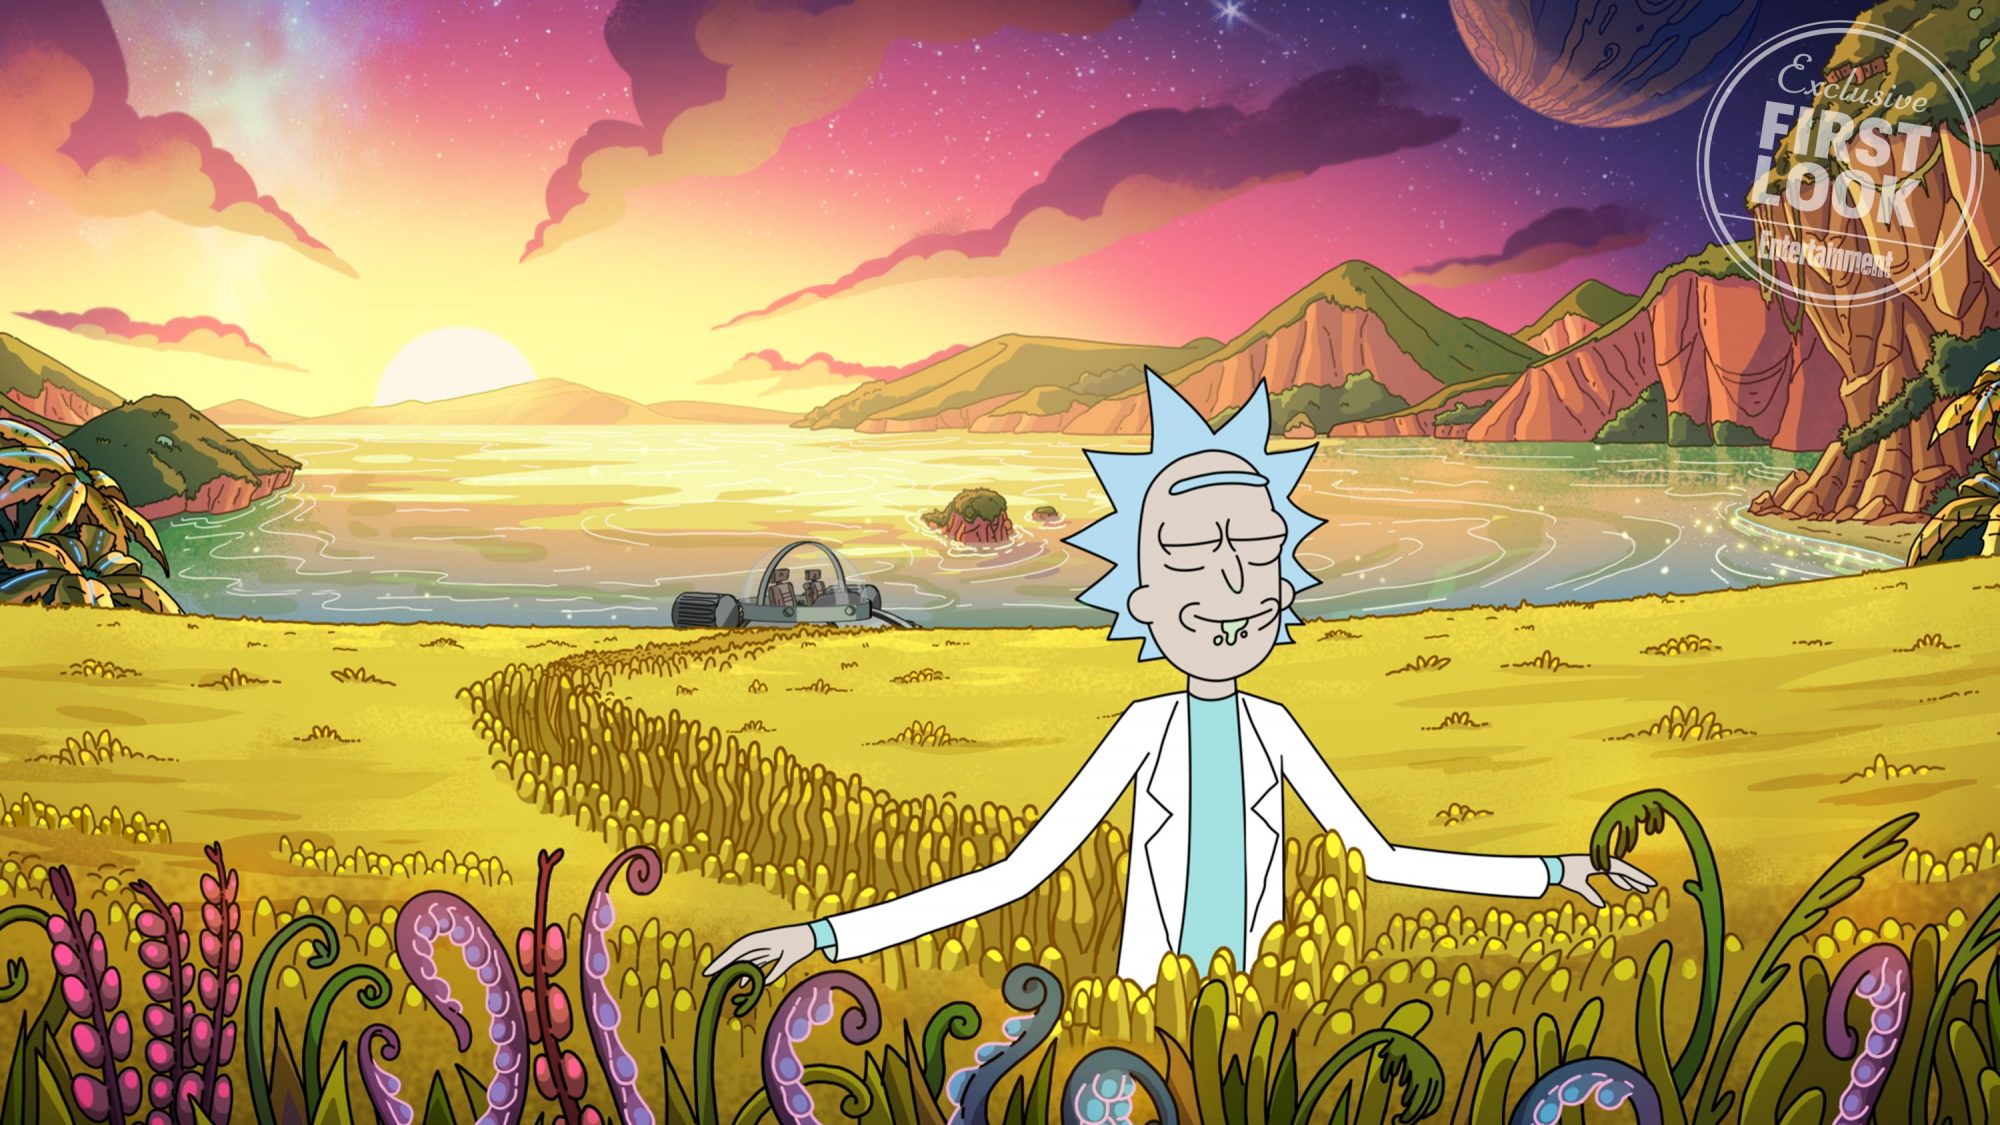 Rick and Morty first photo from season 4 revealed